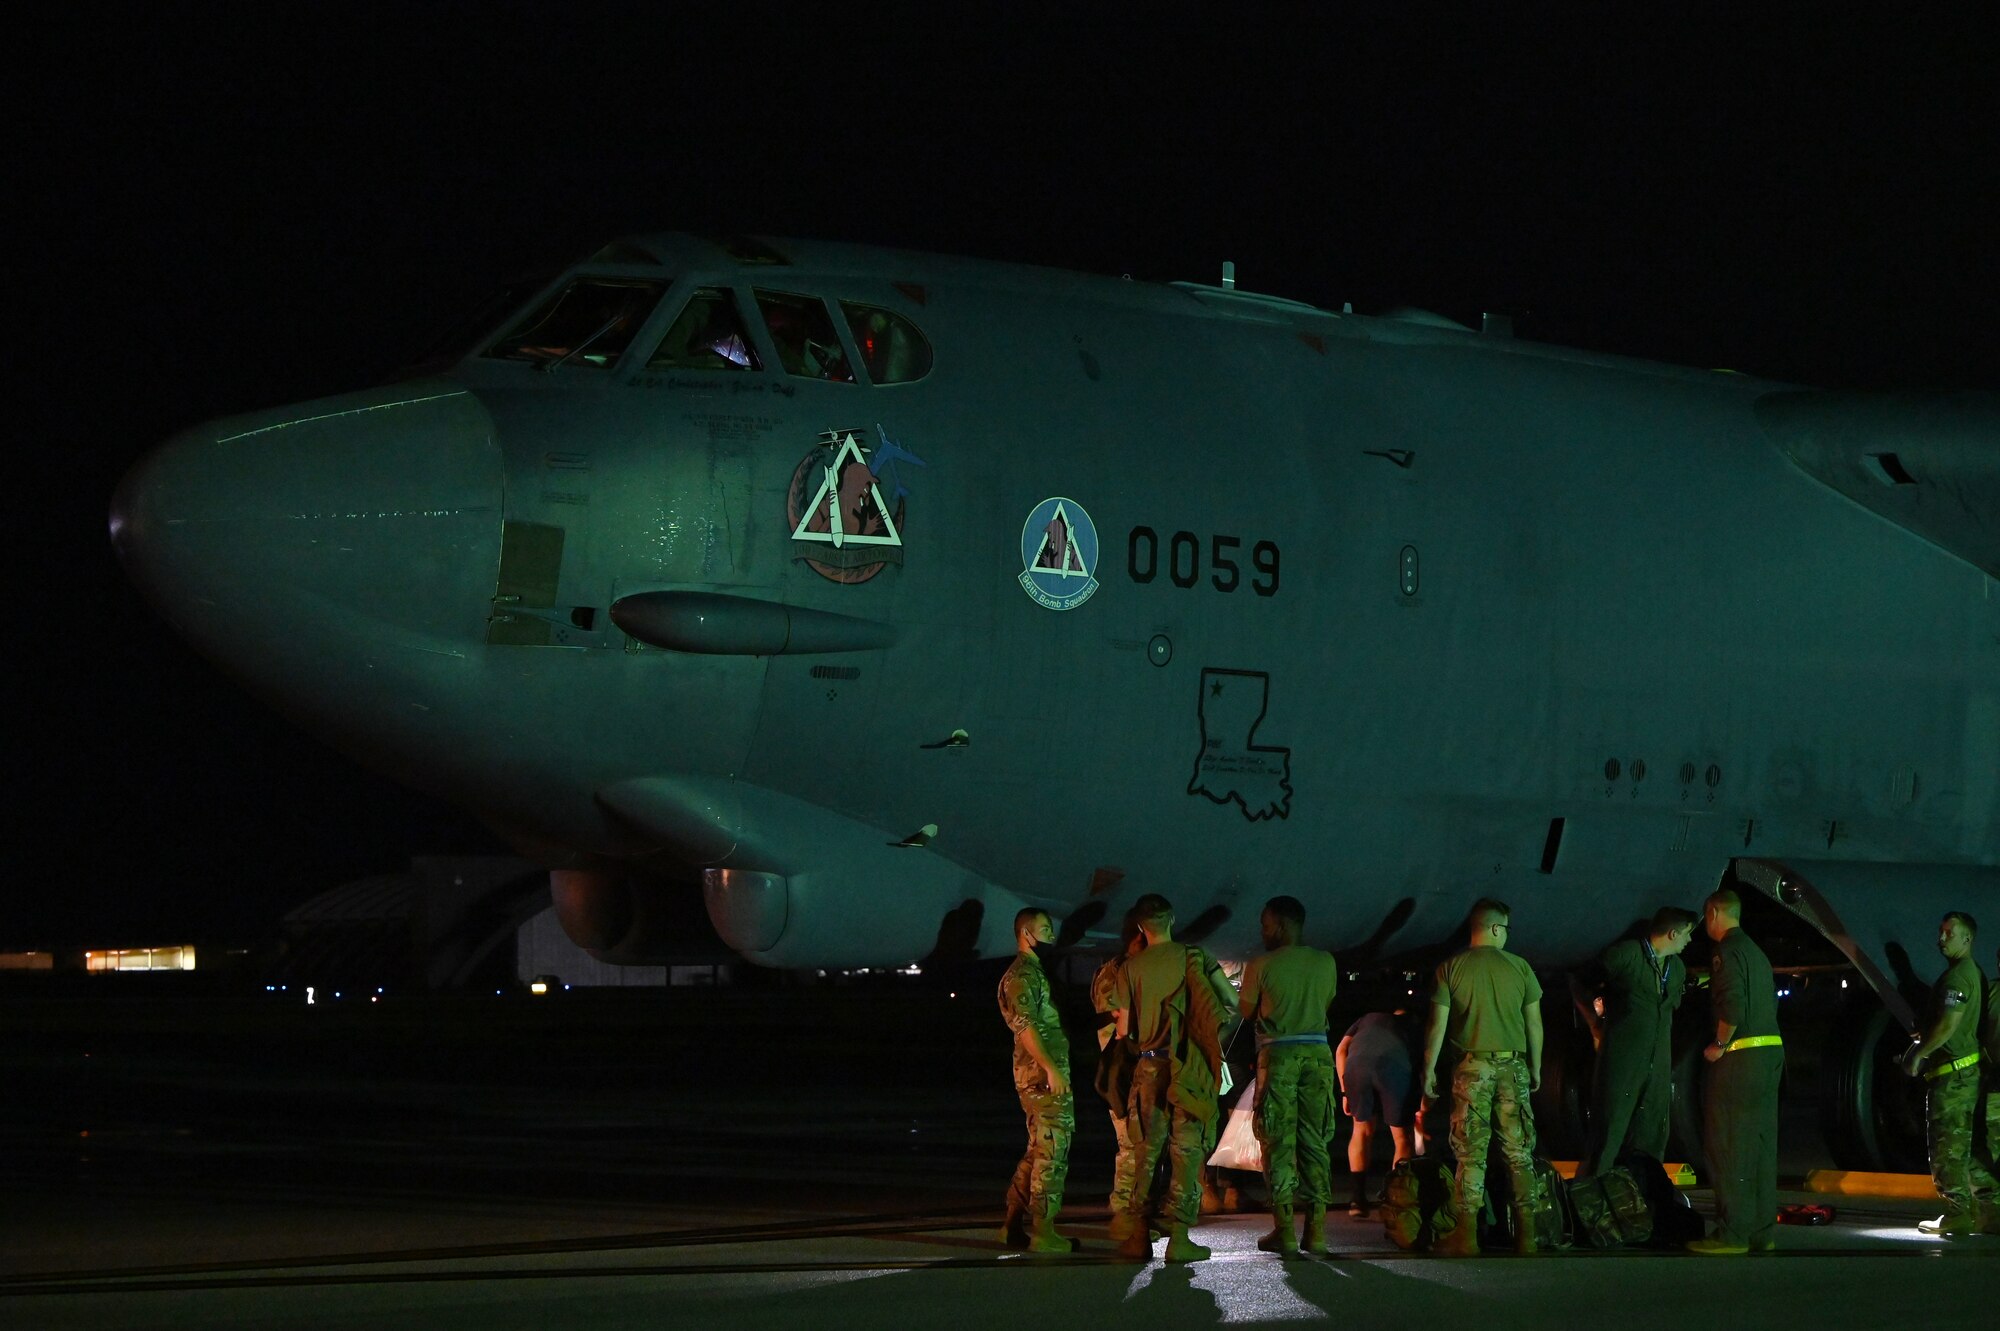 A U.S. Air Force B-52 Stratofortress from the 2nd Bomb Wing, Barksdale Air Force Base Louisiana, arrives at Andersen Air Force Base, Guam, in support of a Bomber Task Force deployment, Aug. 26, 2021. This deployment allows aircrew and support personnel to conduct theater integration and improve bomber interoperability with allies and partners. (U.S. Air Force photo by Staff Sgt. Alysia Blake)